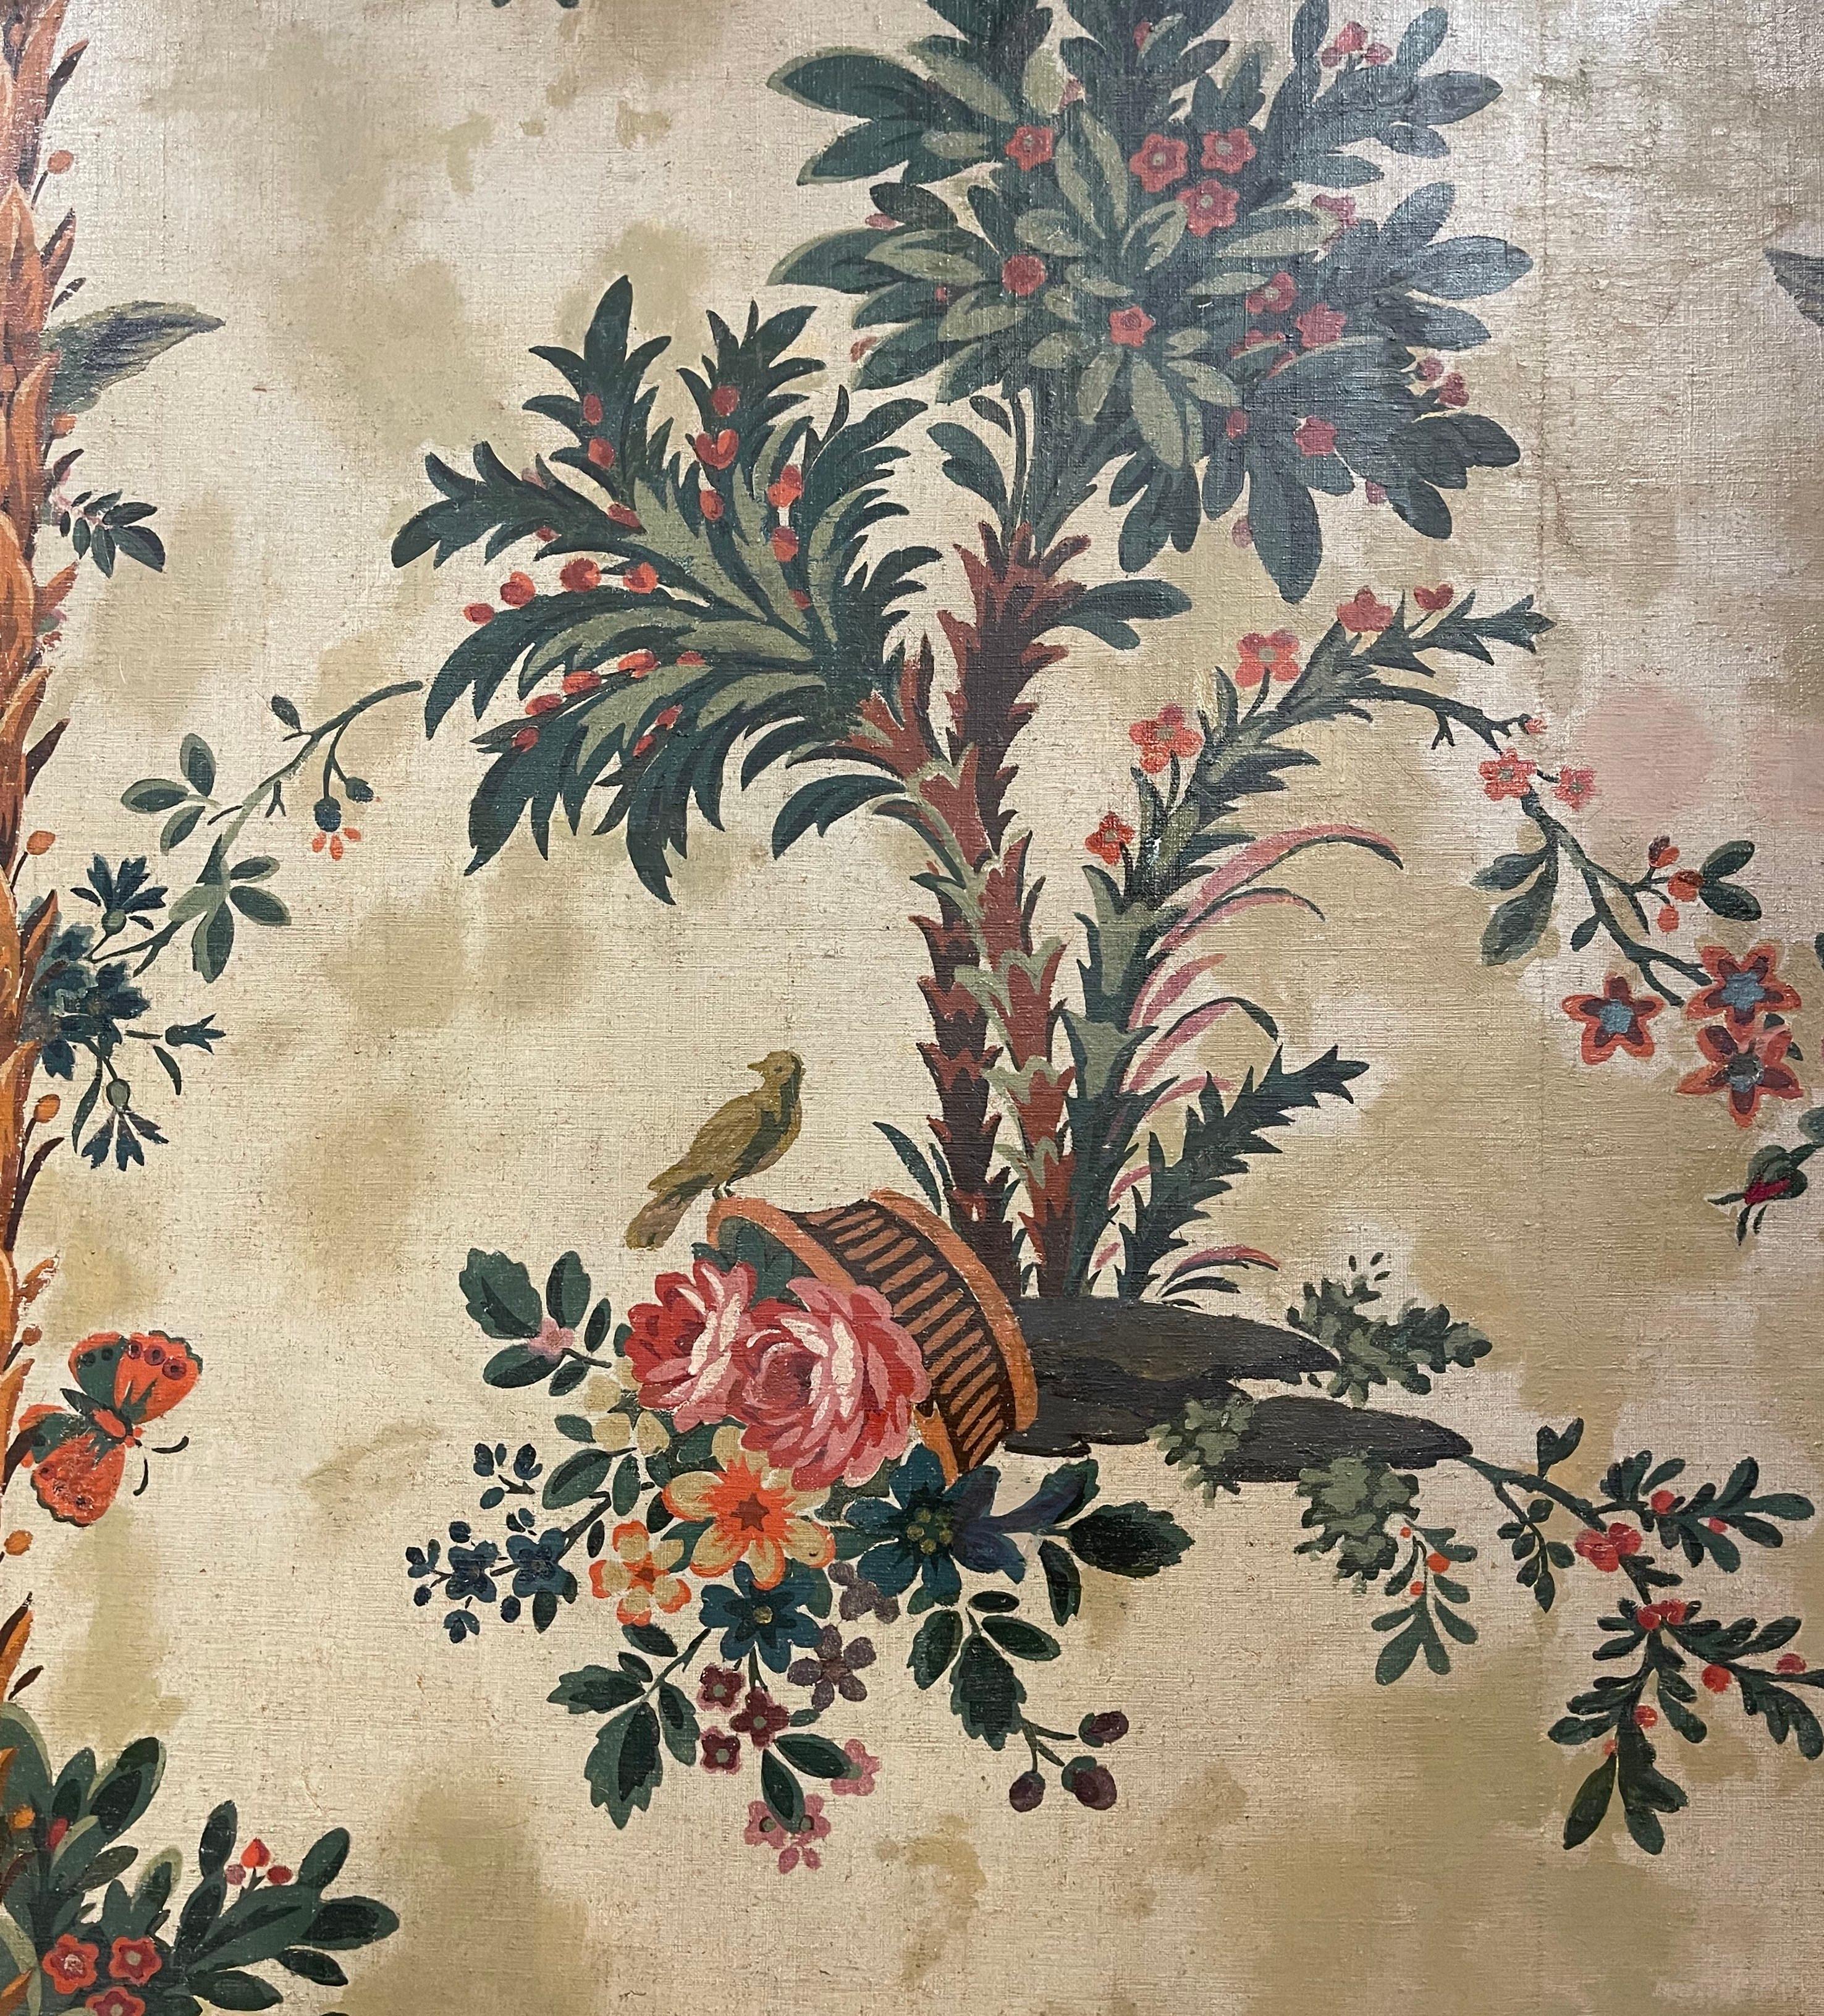 19th Century French Hand Painted Oil on Canvas Painting with Foliage Bird Motifs For Sale 2